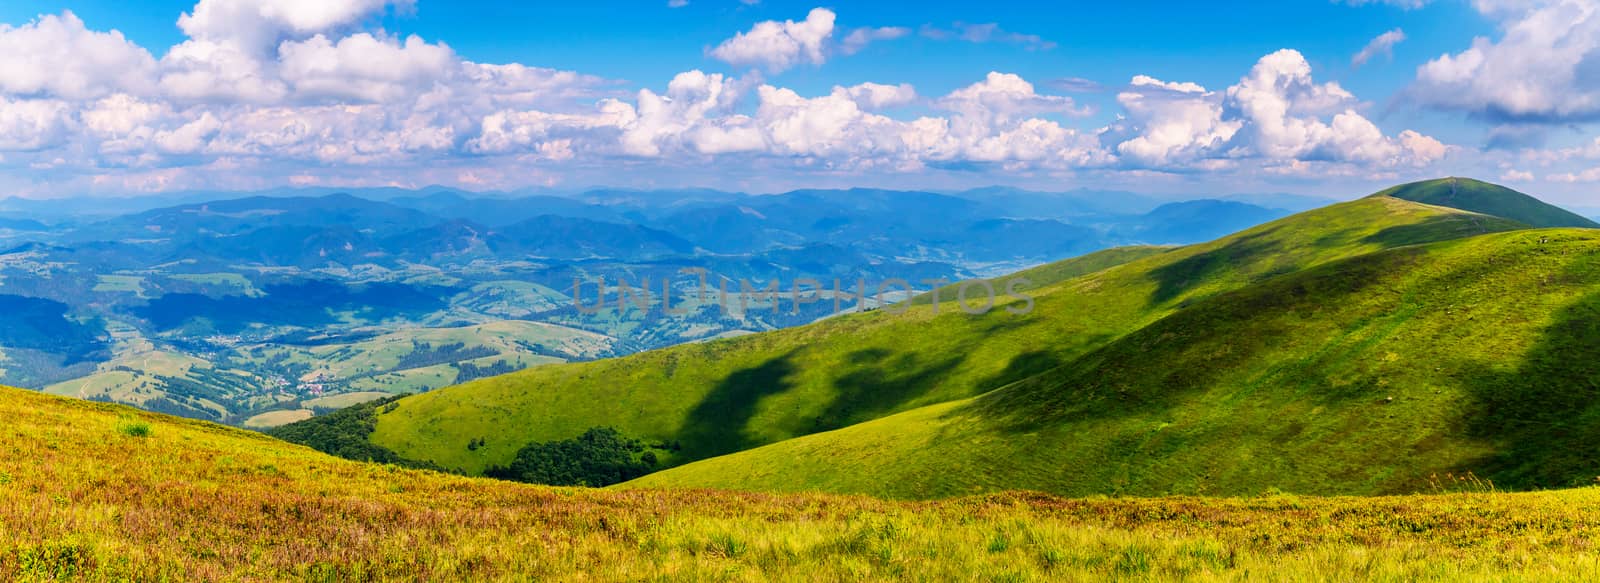 bright peaks of the Carpathians are covered with green grass, over which white fluffy clouds swim by Adamchuk